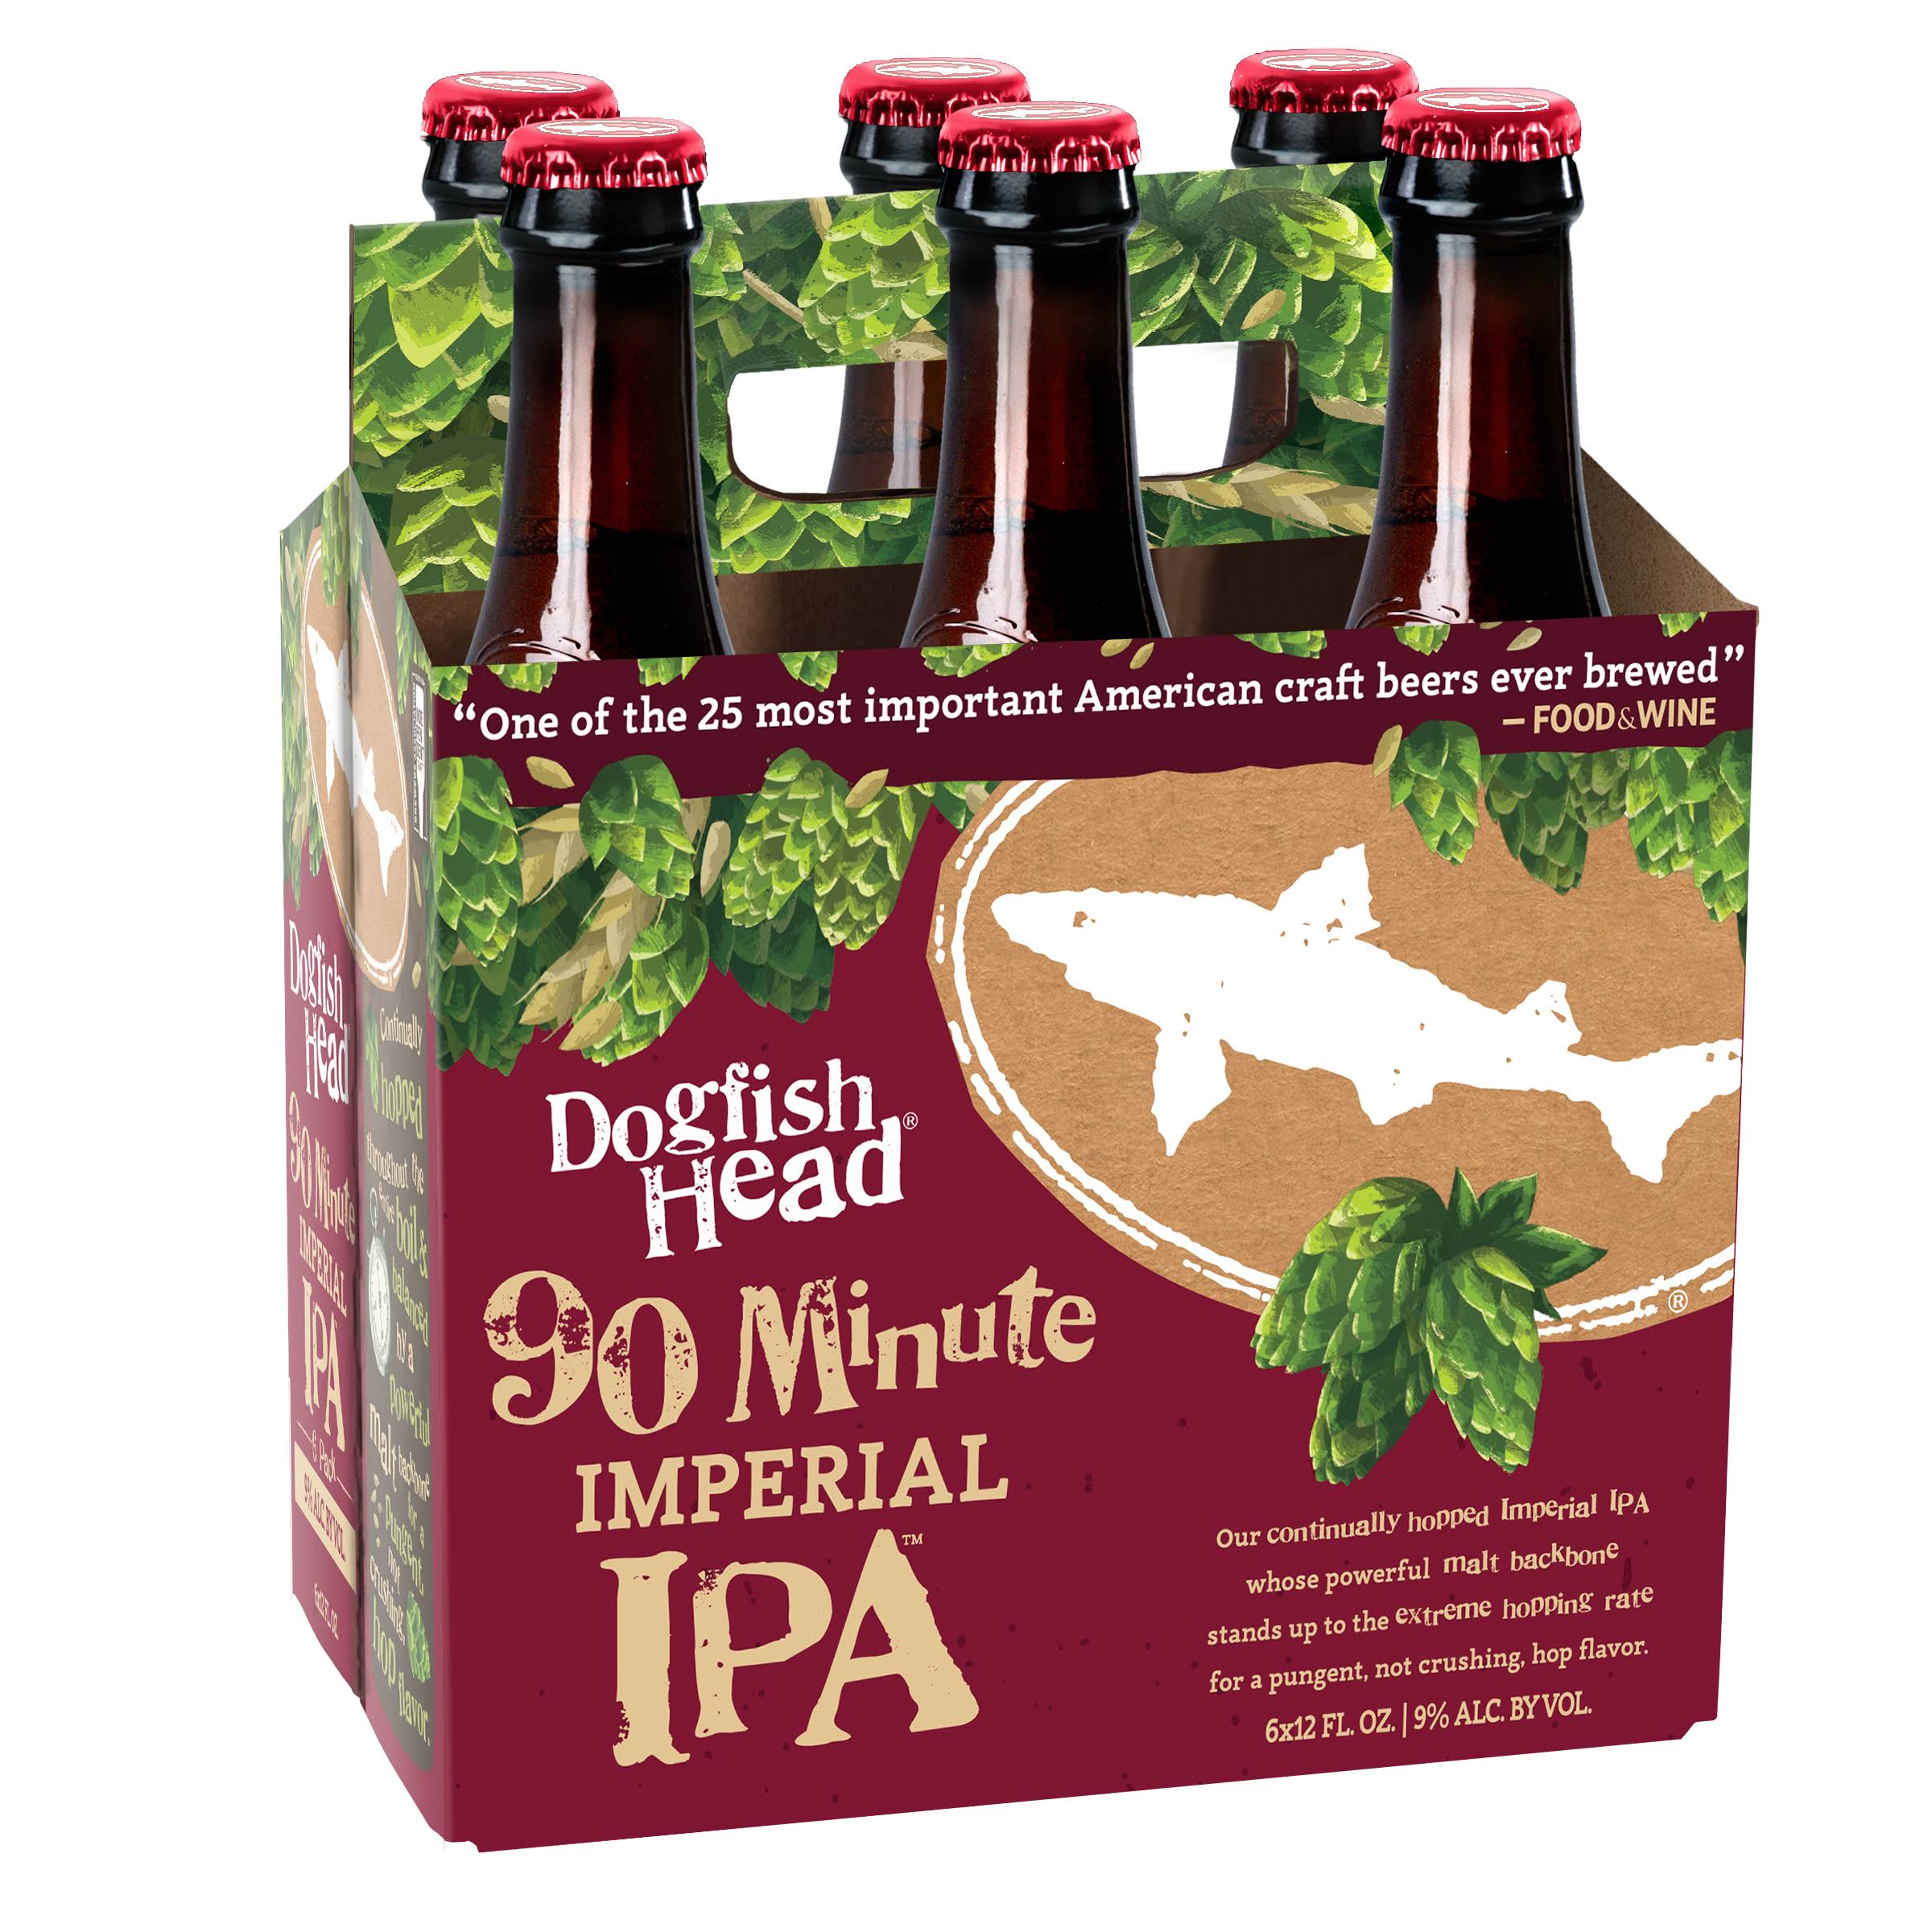 Dogfish Head Beer, Imperial IPA, 90 Minutes, 6 Pack - 6 pack, 12 fl oz bottles